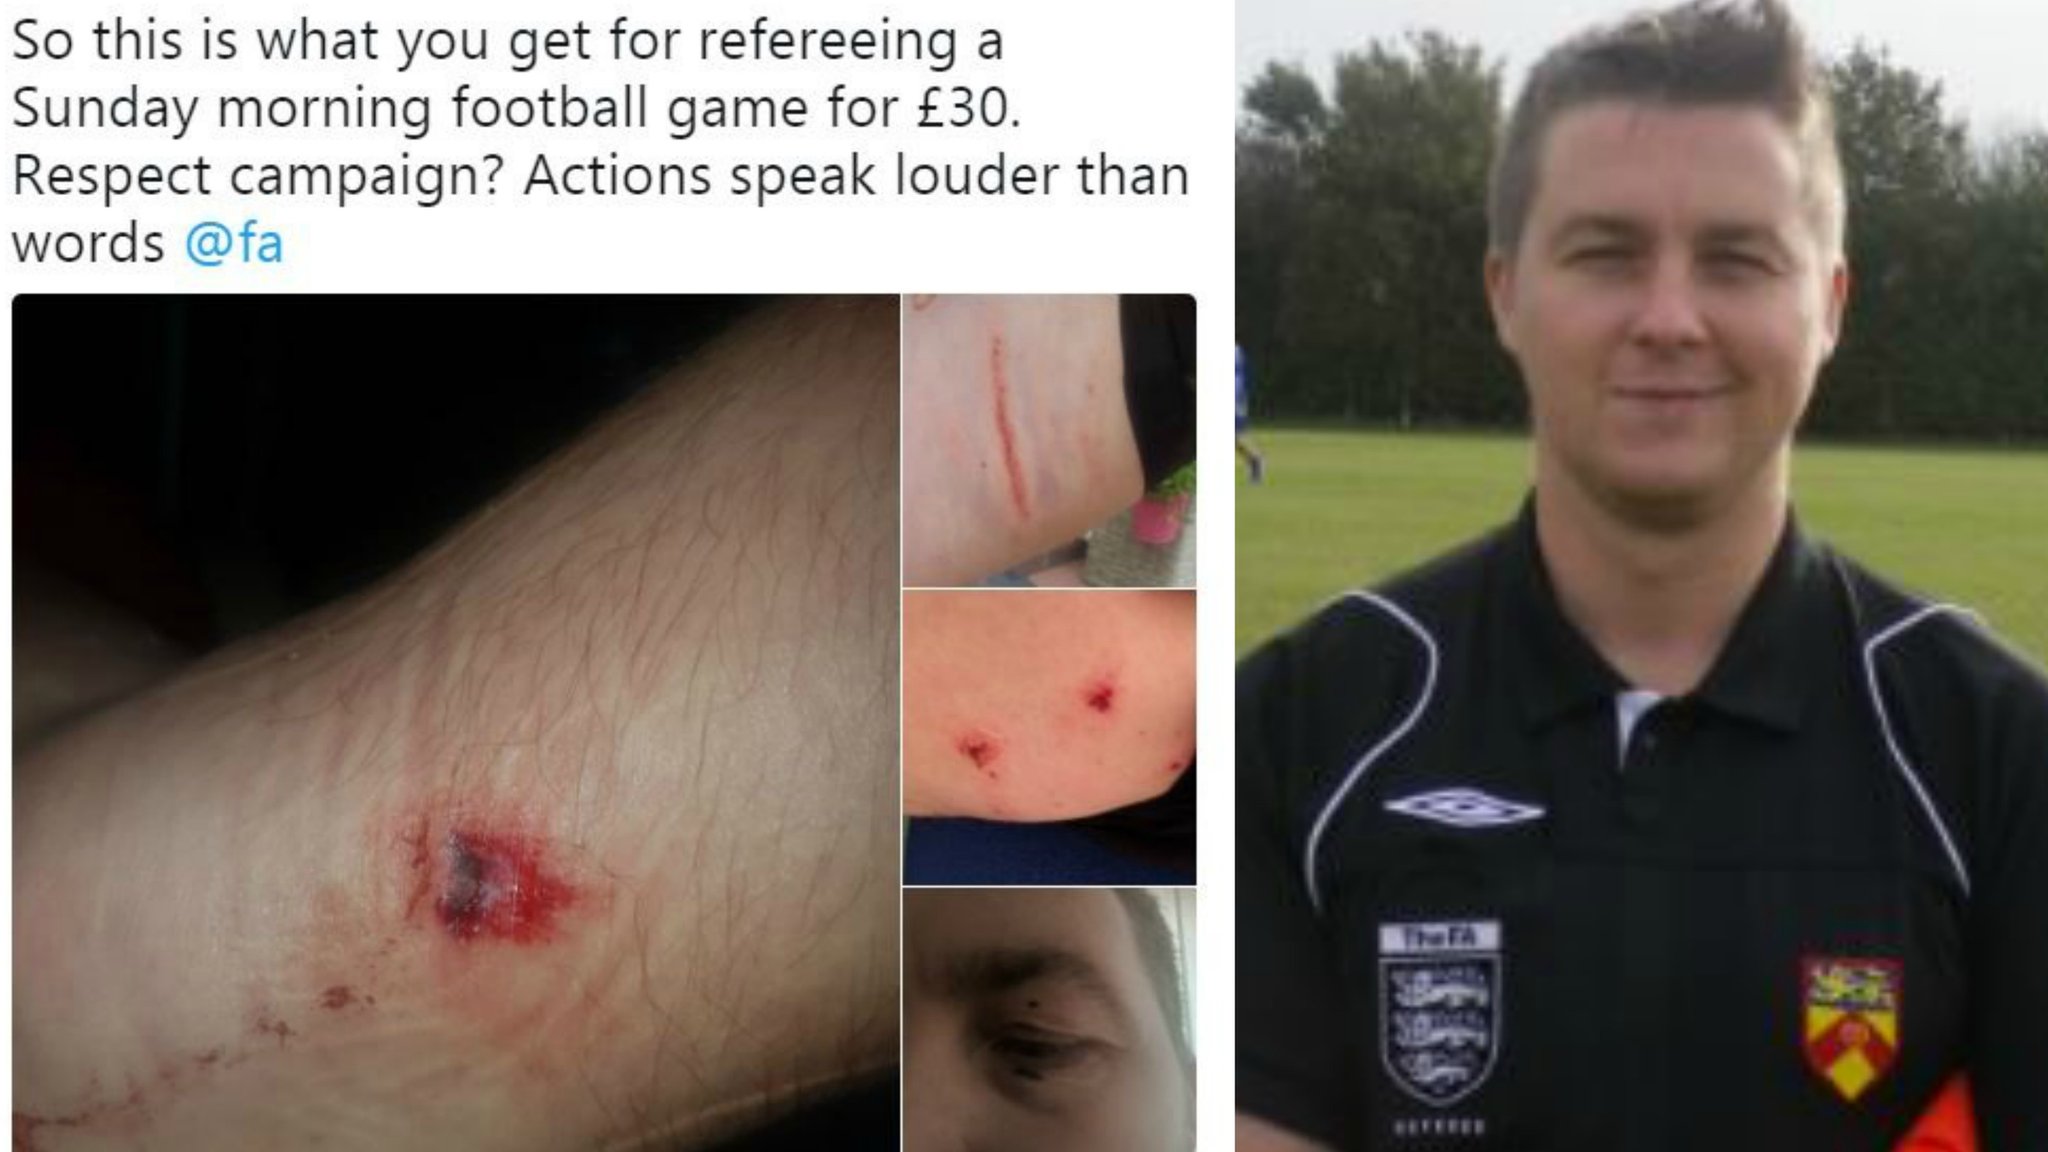 '£30 to be punched and kicked' - Sunday football ref quitting after second alleged assault